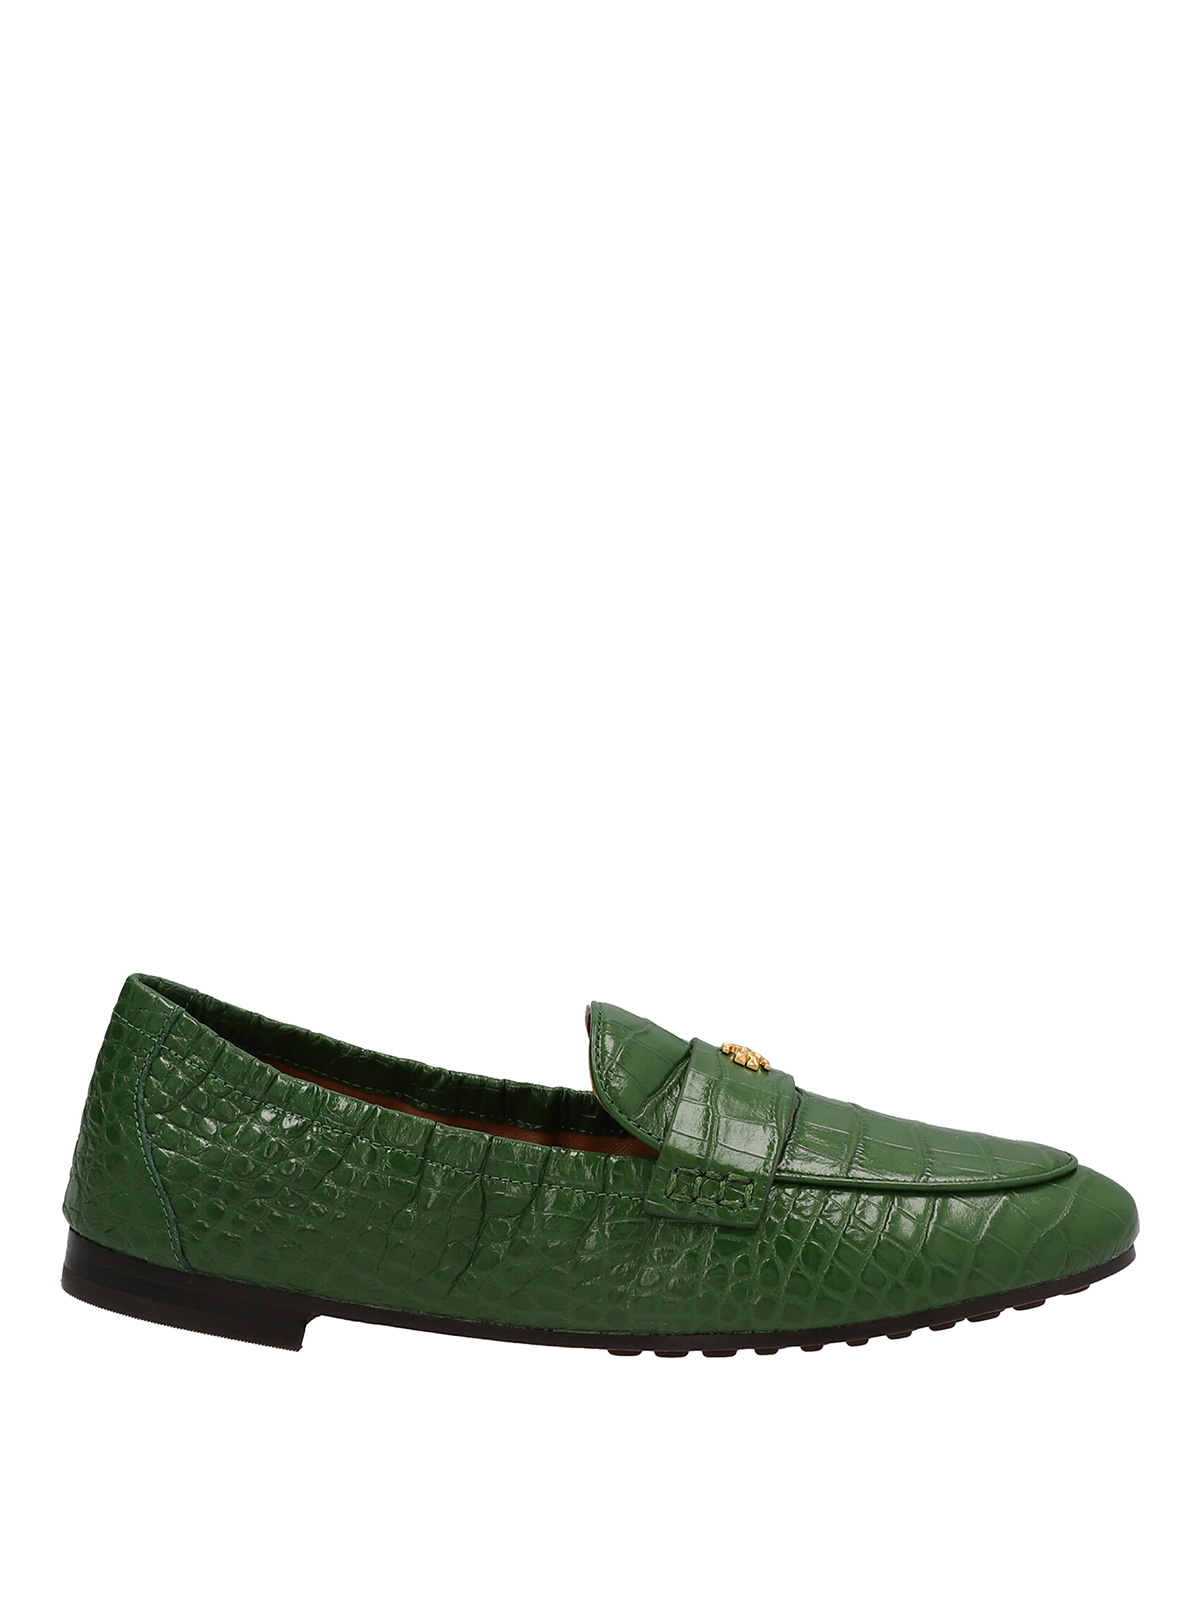 Loafers & Slippers Tory Burch - Ballet loafers - 136976367 | iKRIX.com